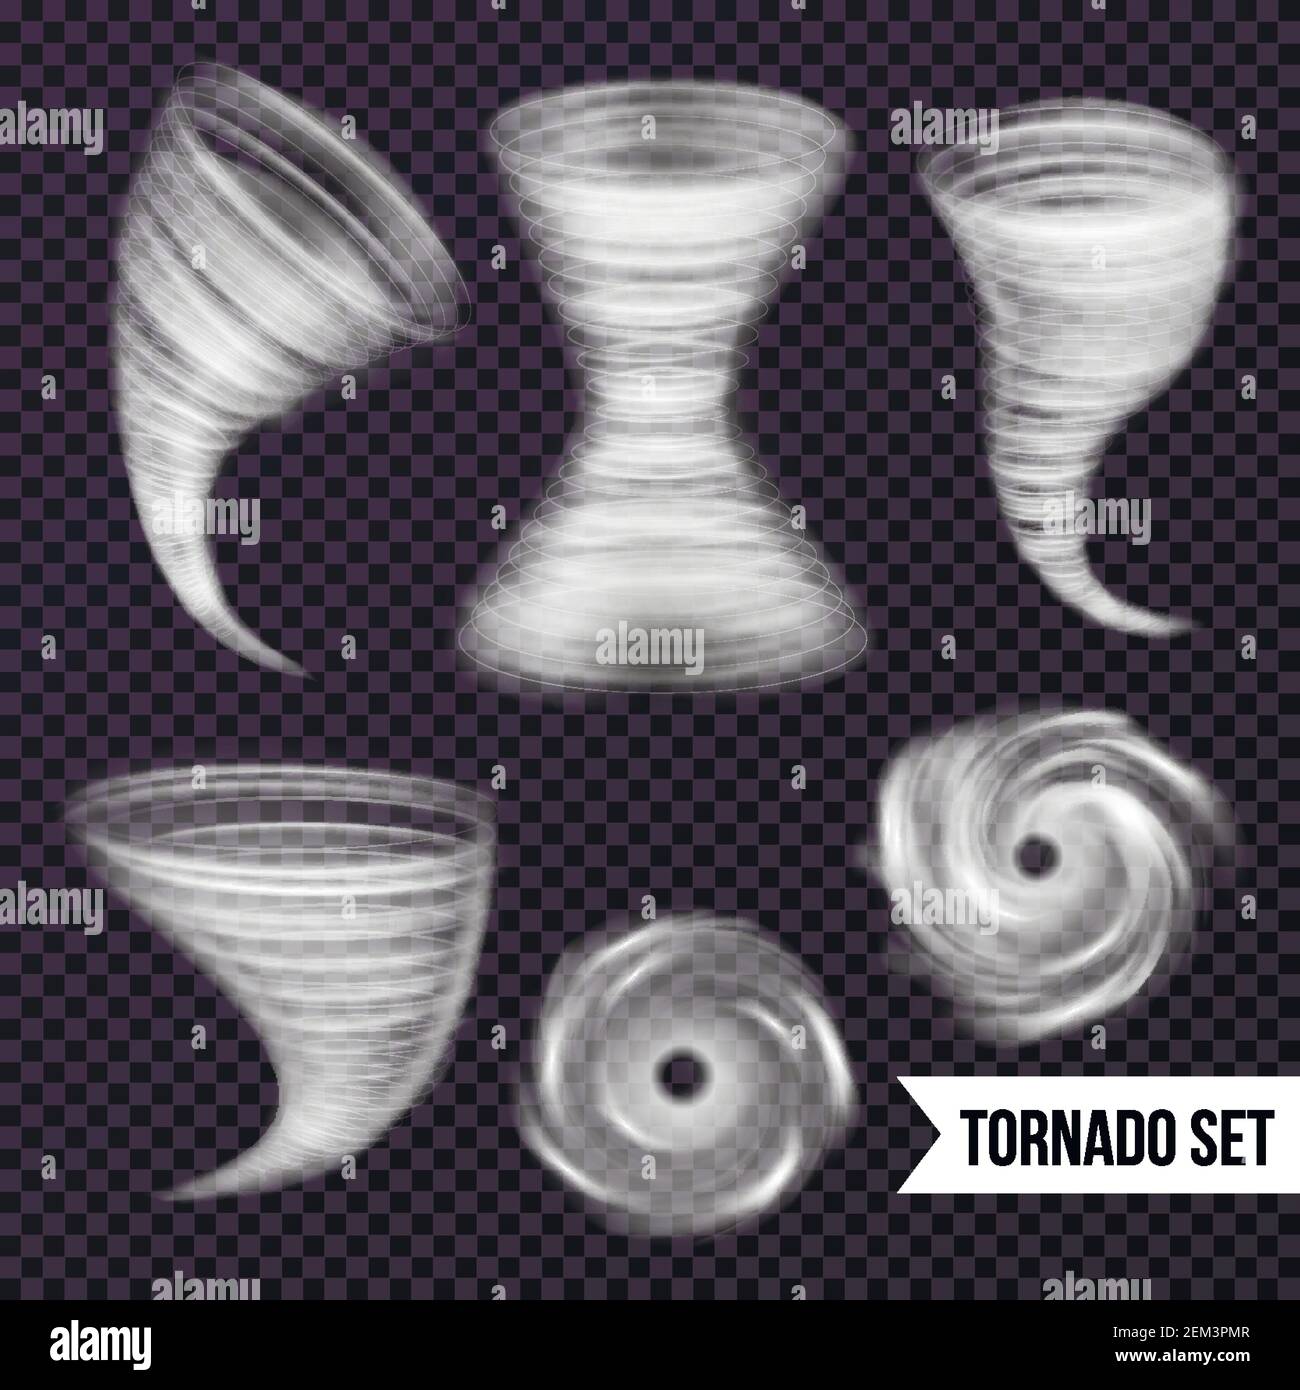 Storm hurricane tornado cyclone realistic set with isolated images of airy spiral swirls on transparent background vector illustration Stock Vector